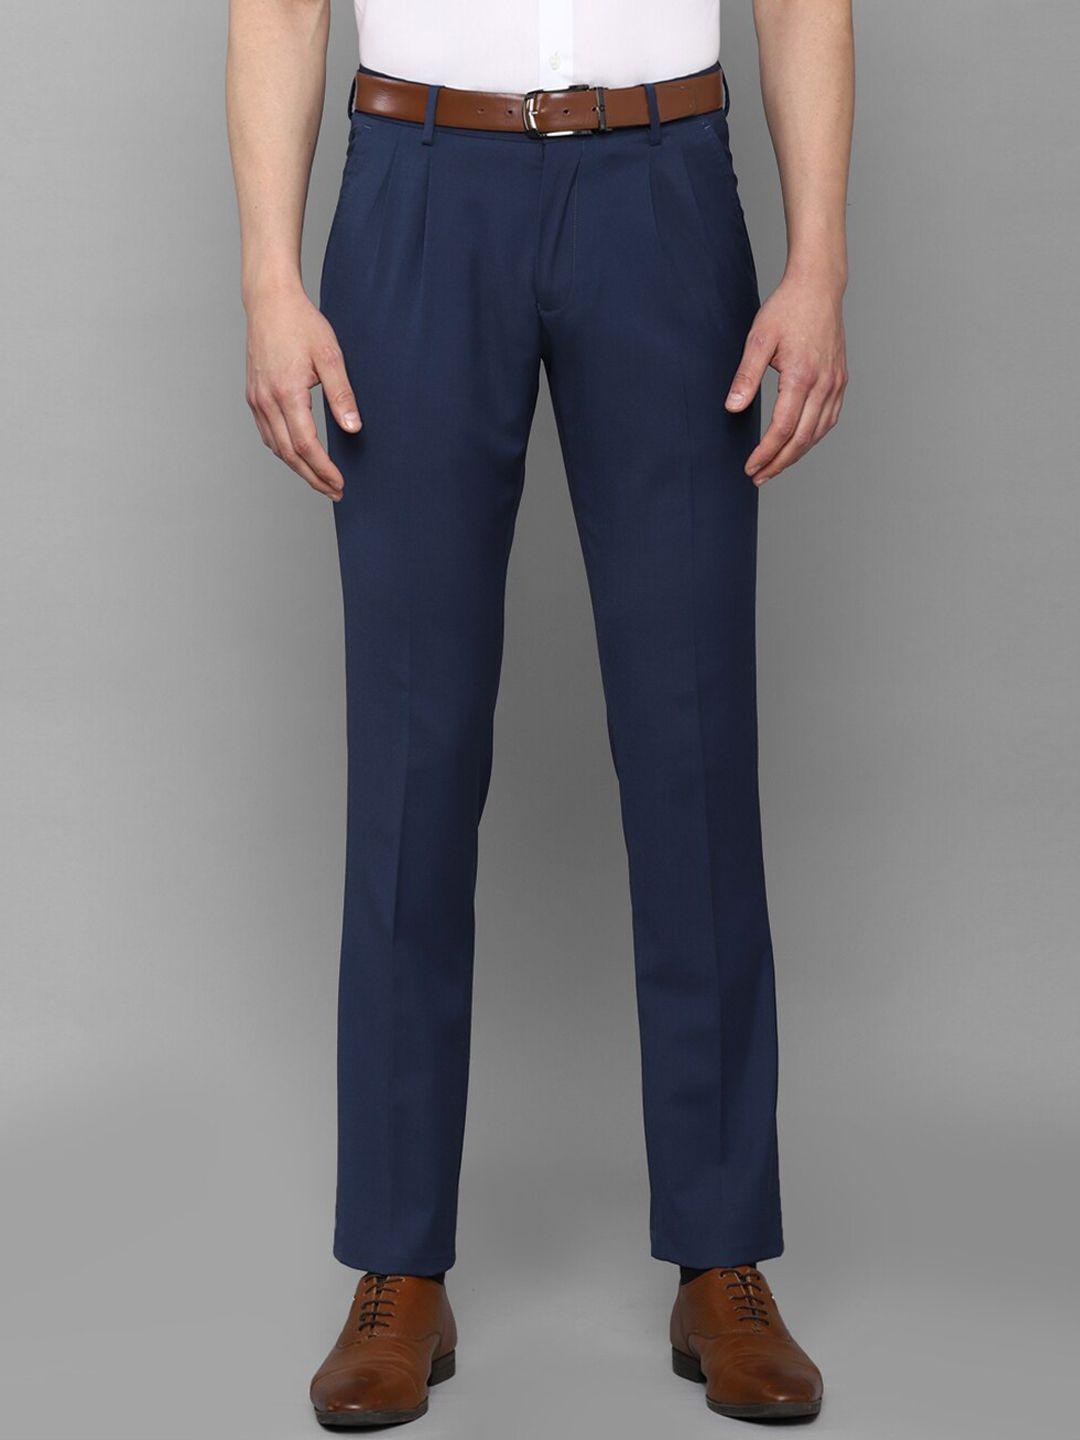 louis-philippe-men-navy-blue-pleated-trousers